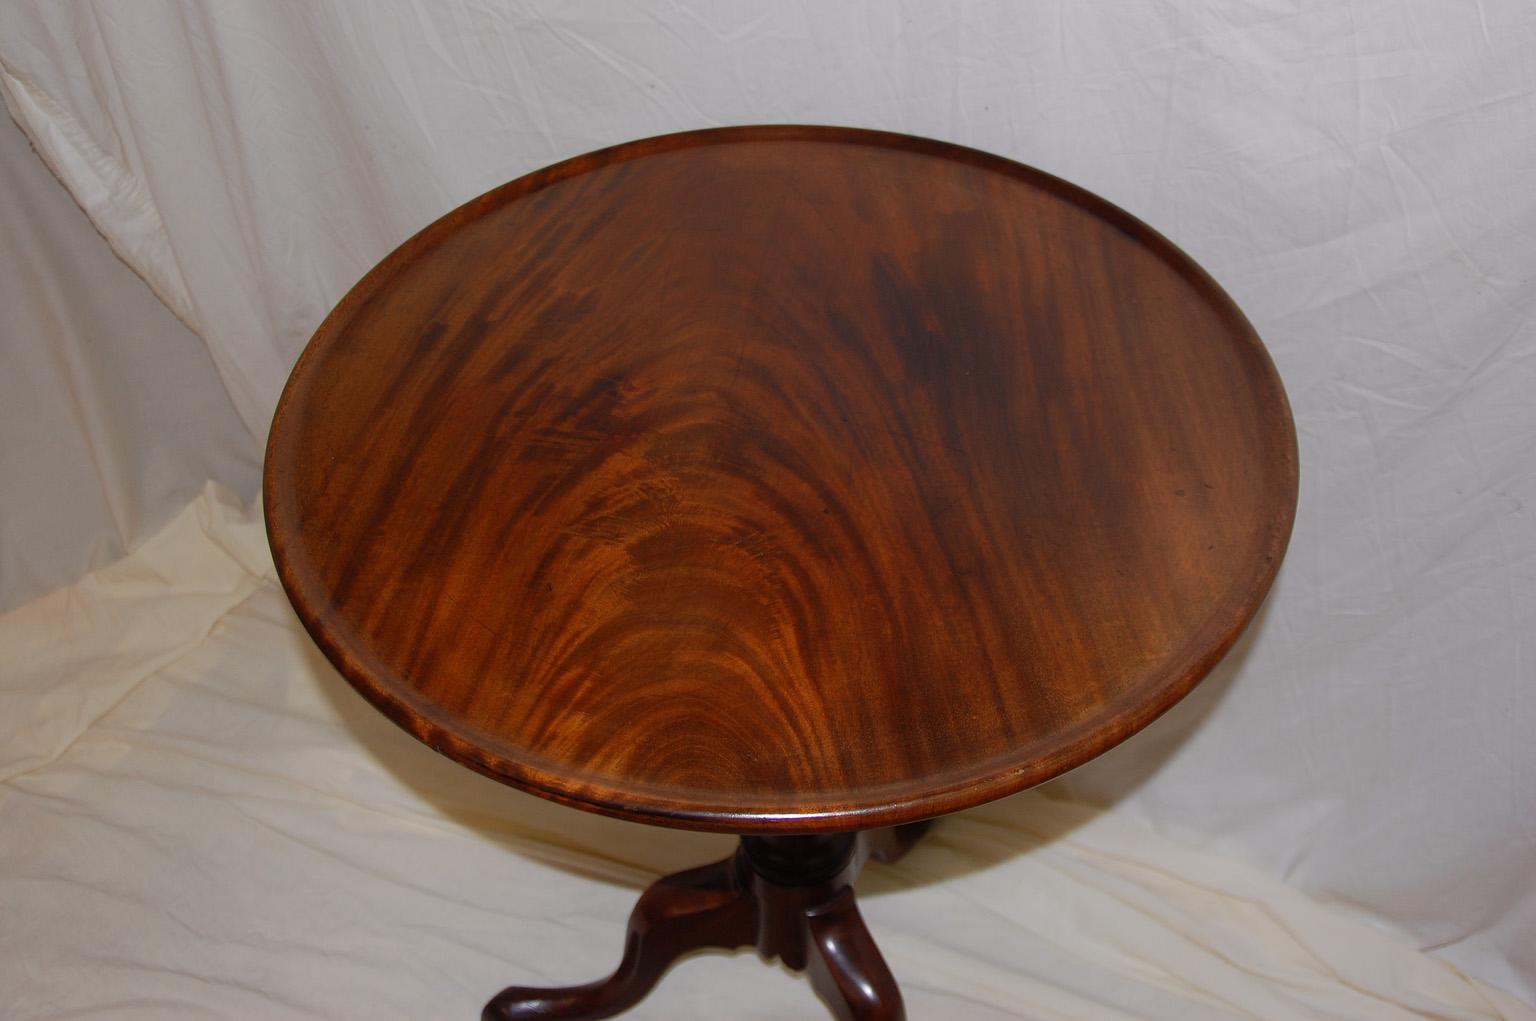 English 18th century Georgian Chippendale mahogany dishtop, tilt top tripod table. This table has a one board flame grain mahogany top that has been carved out to form a dishtop; the carved mahogany cabriole legs end in pad feet, the stem is